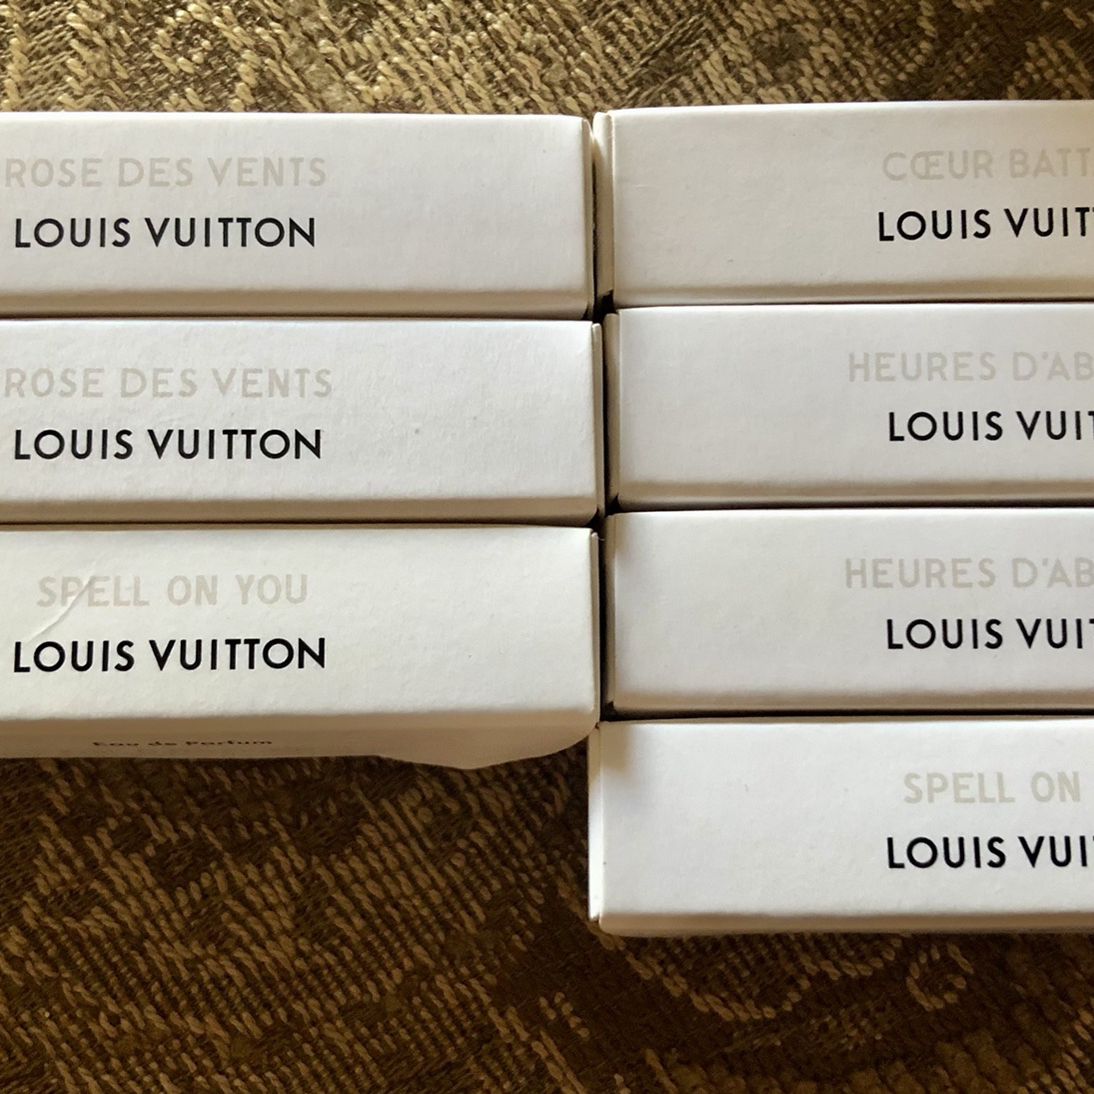 LV Sample Perfume for Sale in San Diego, CA - OfferUp